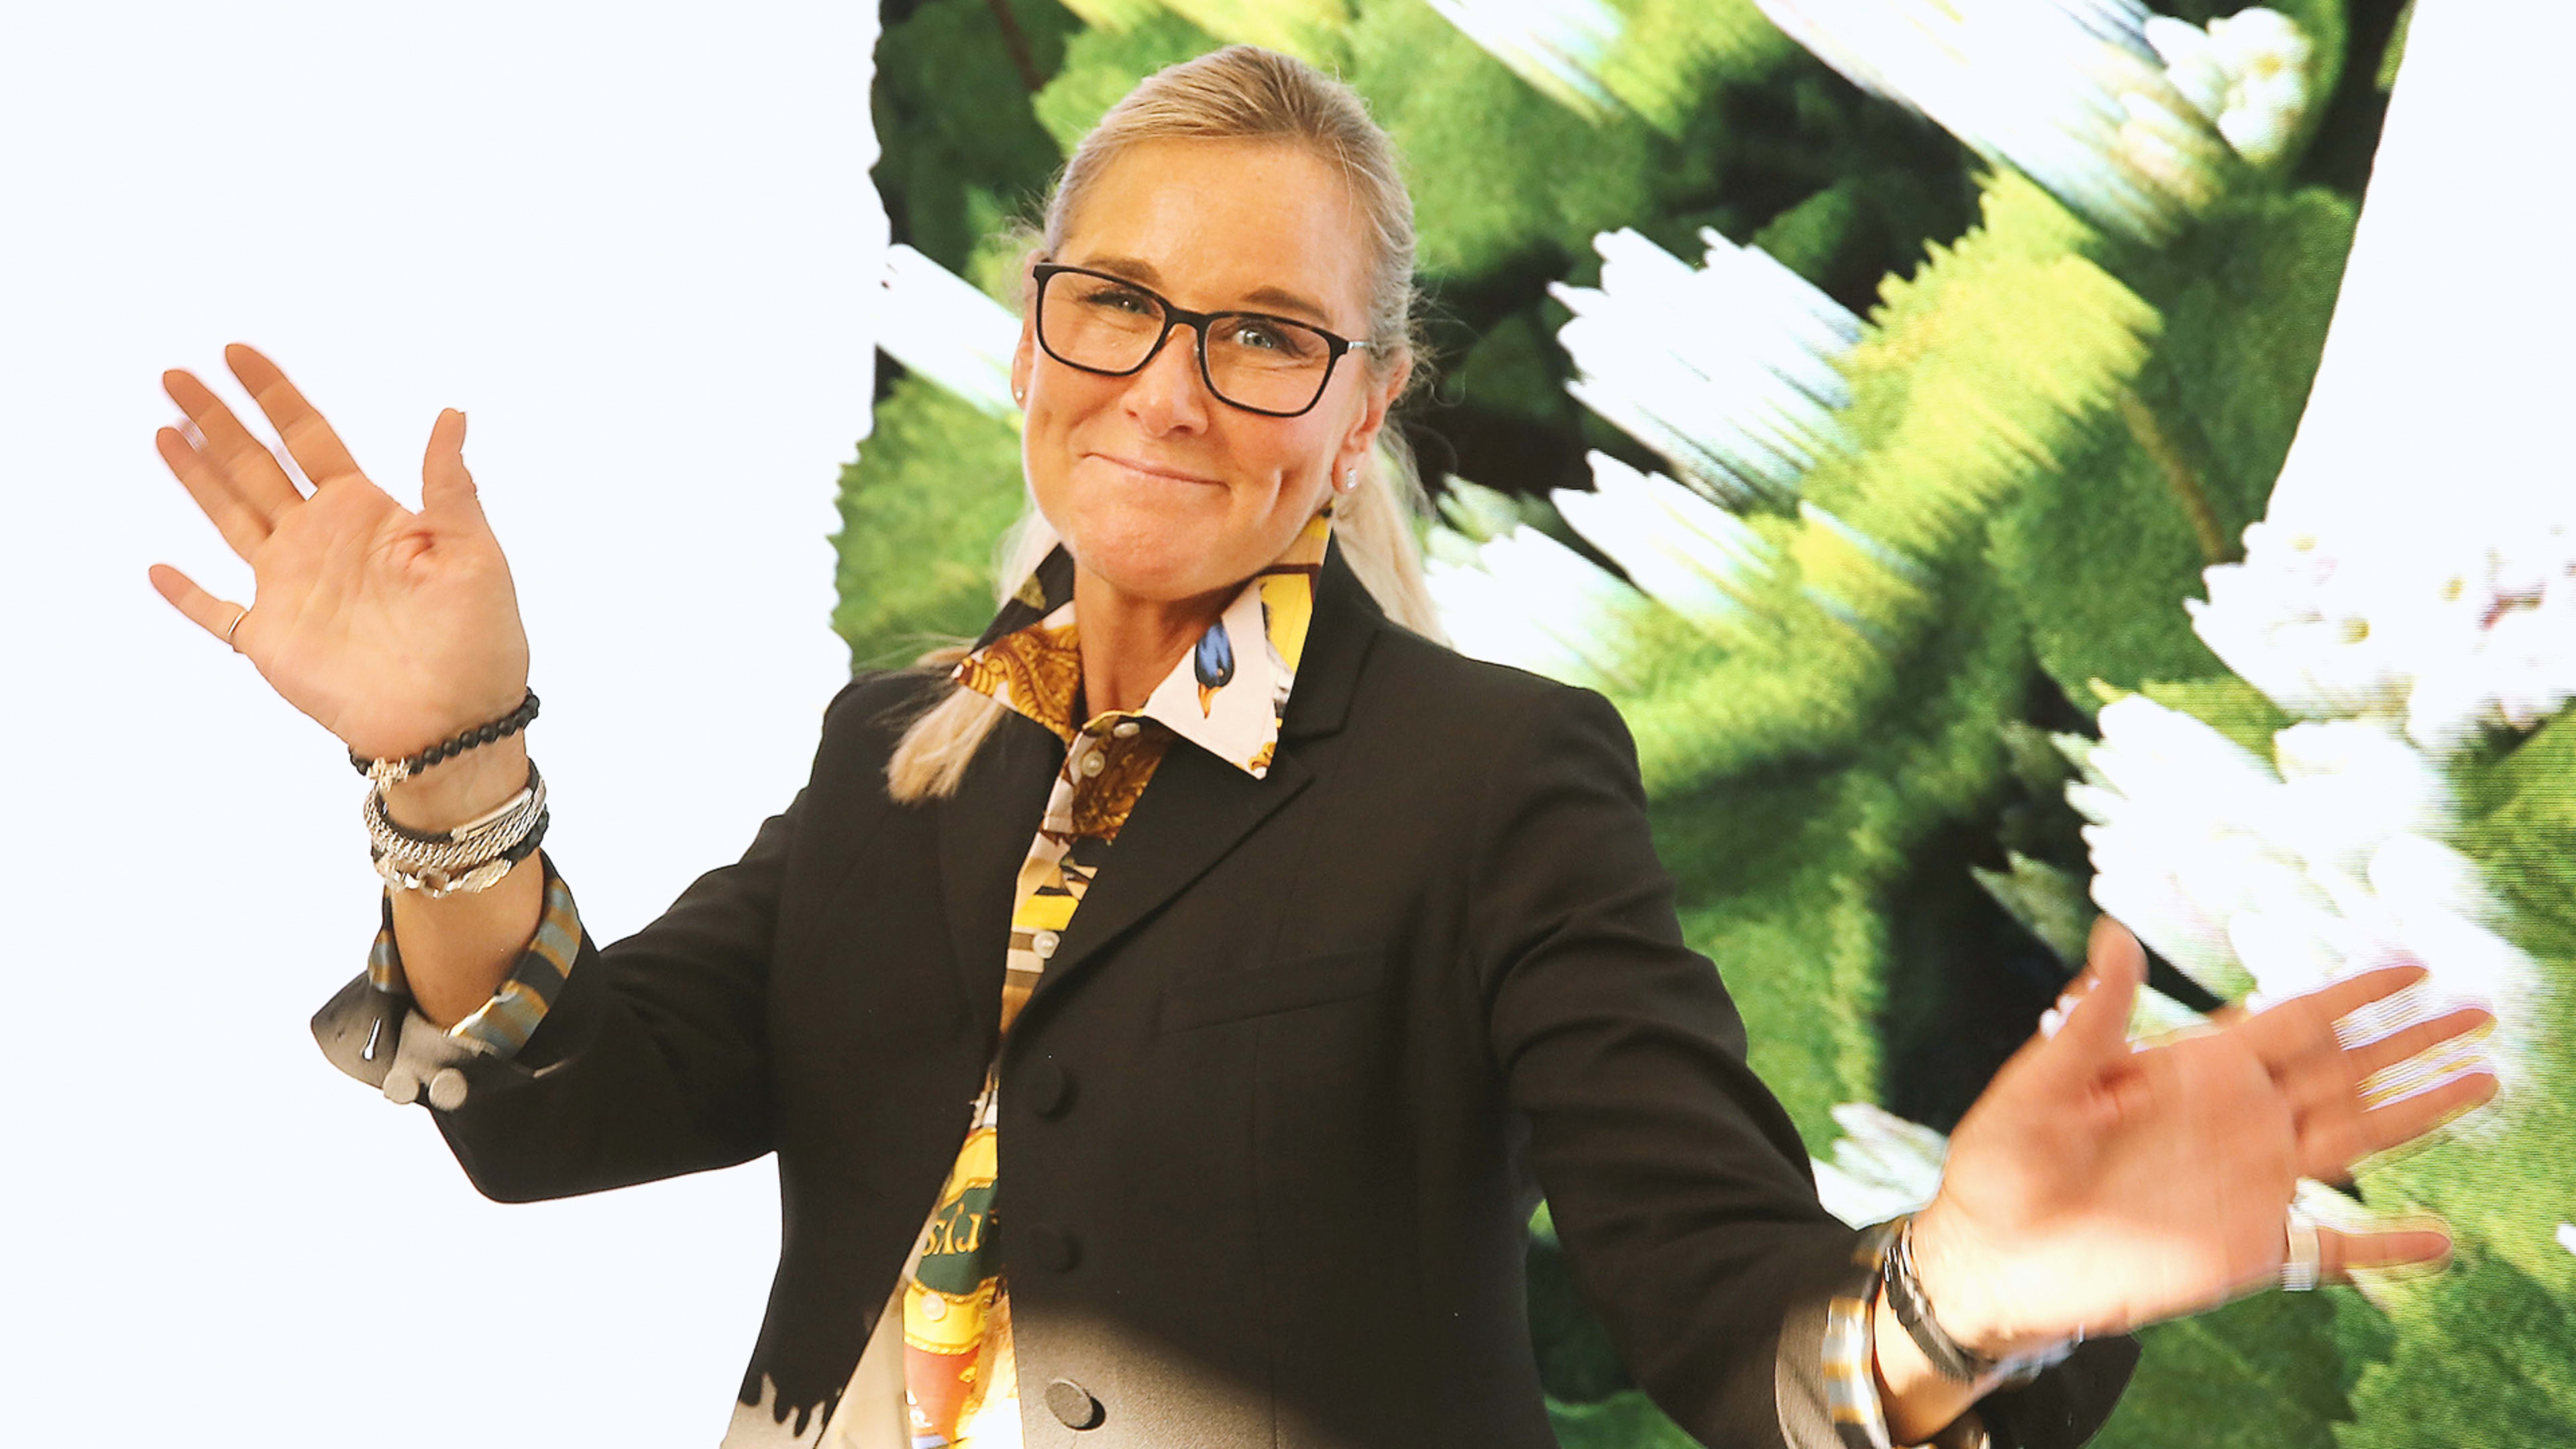 Apple retail chief Angela Ahrendts is stepping down in April